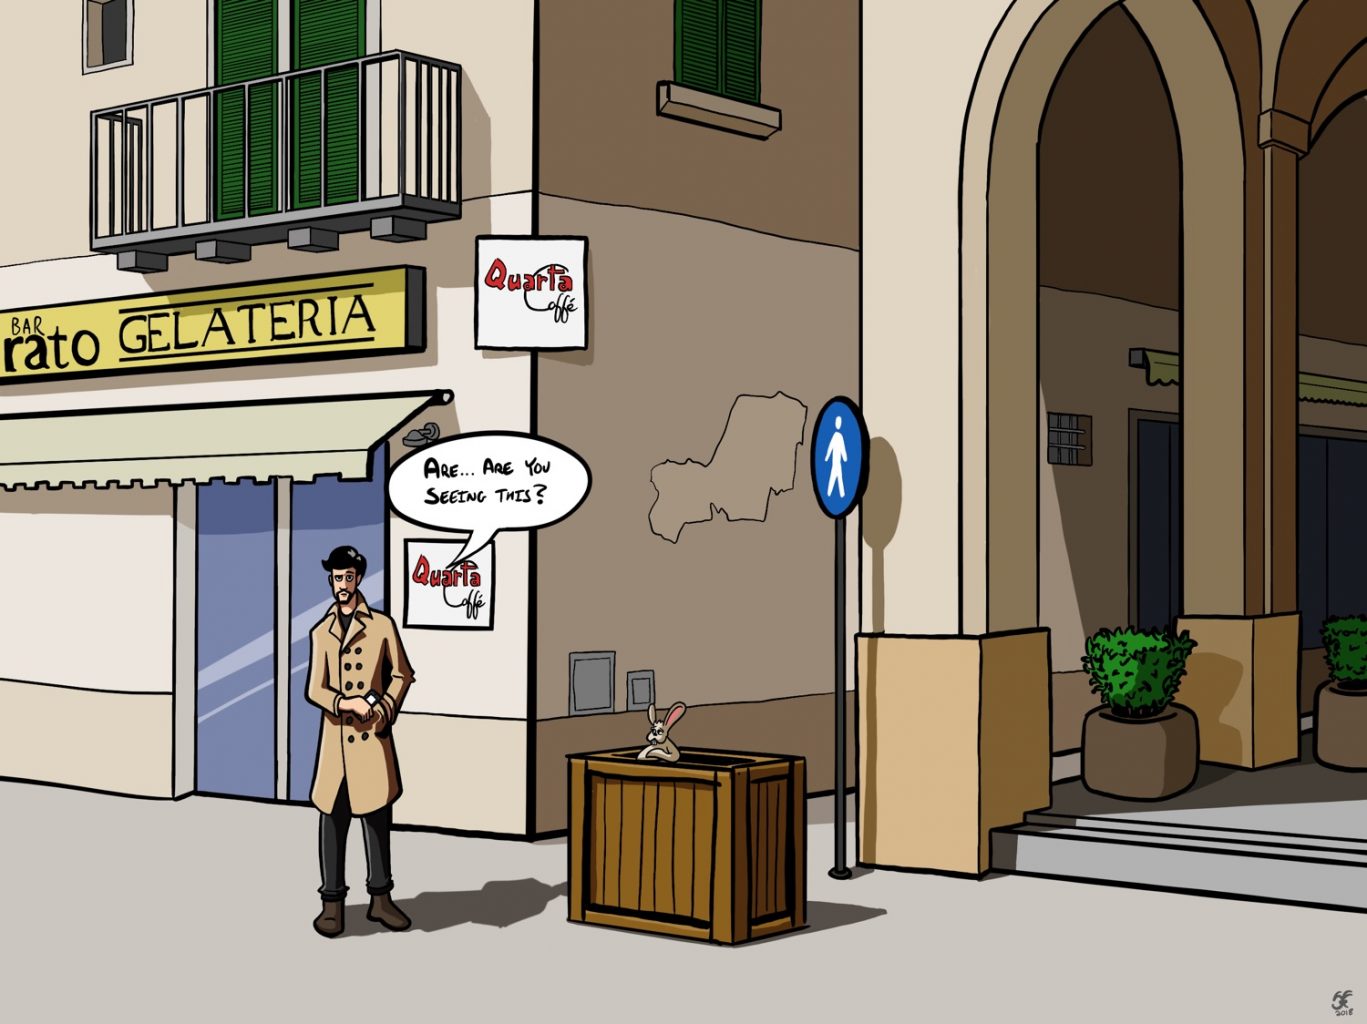 An illustration of a piazza in Lecce, Italy, with a man in trench coat standing next to a box with a rabbit poking out of it. He is saying 'Are...are you seeing this?'